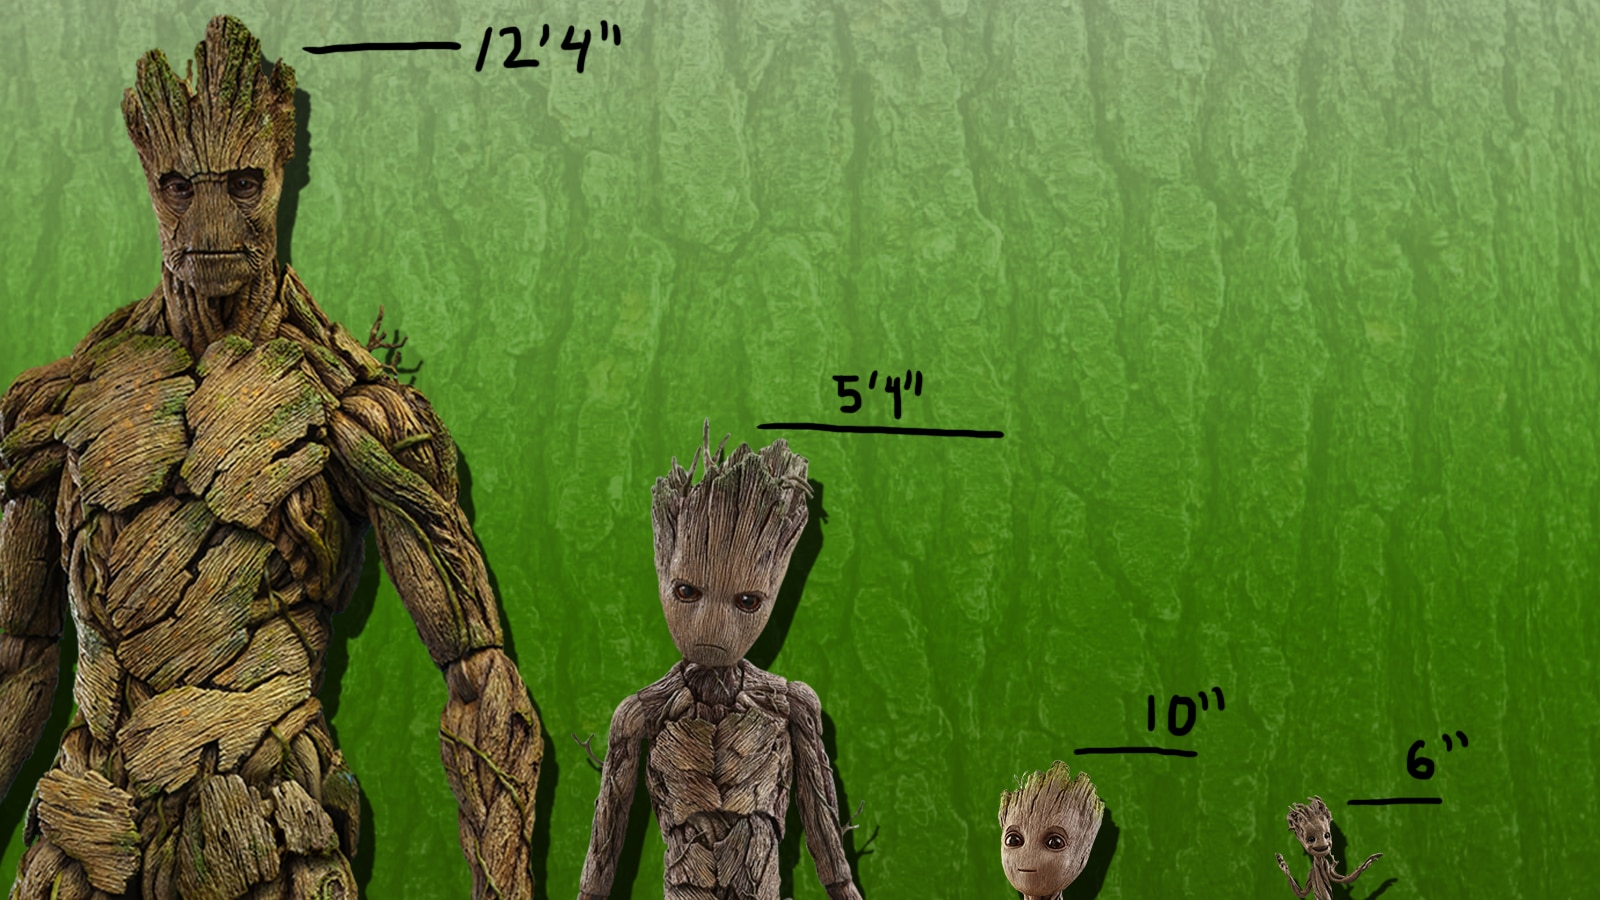 What is Groot's growth rate, scientifically?